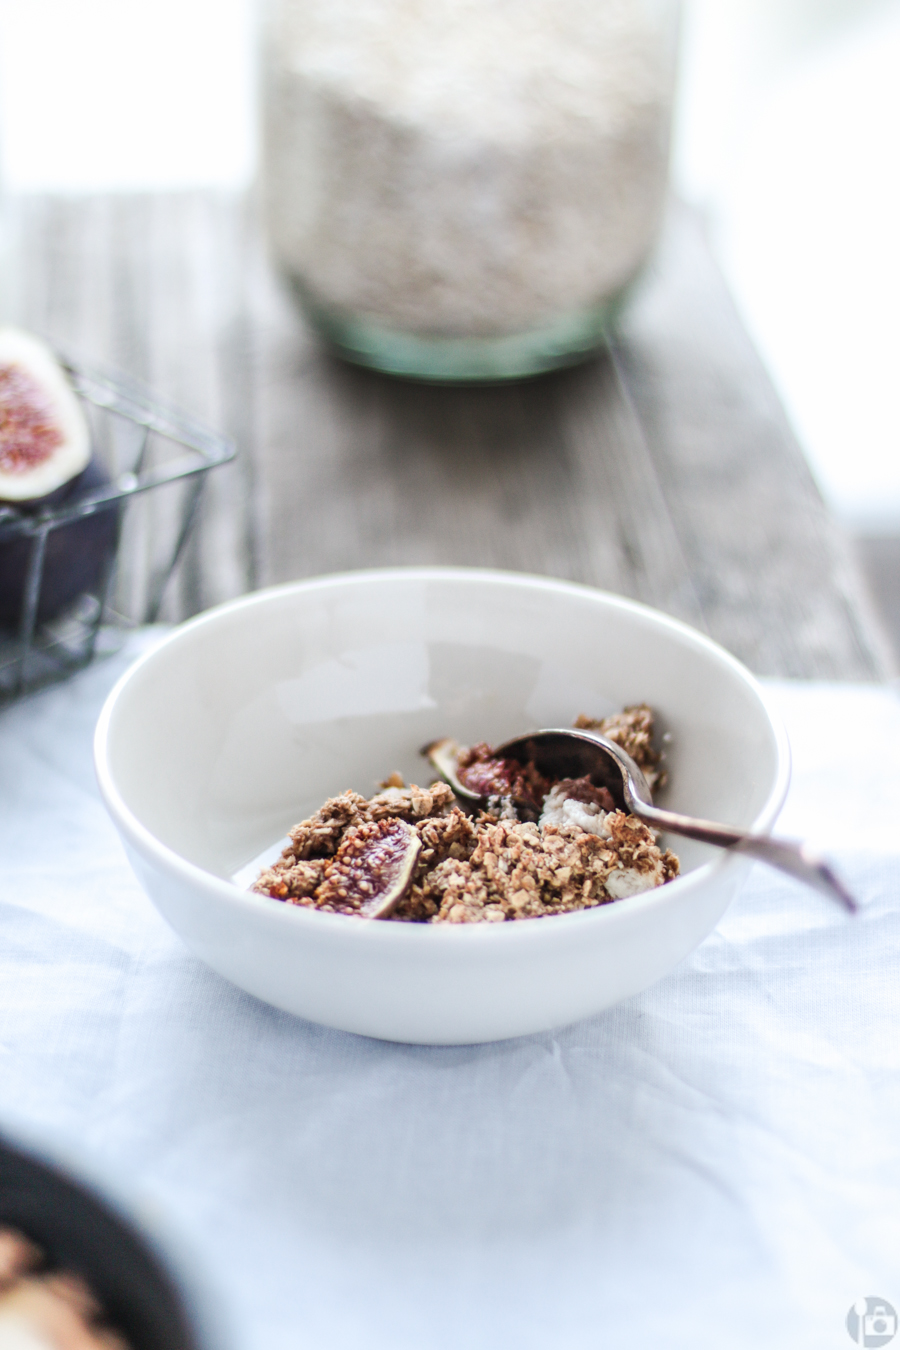 Cinnamon spiced oatmeal with apples, figs and greek yogurt for that extra protein